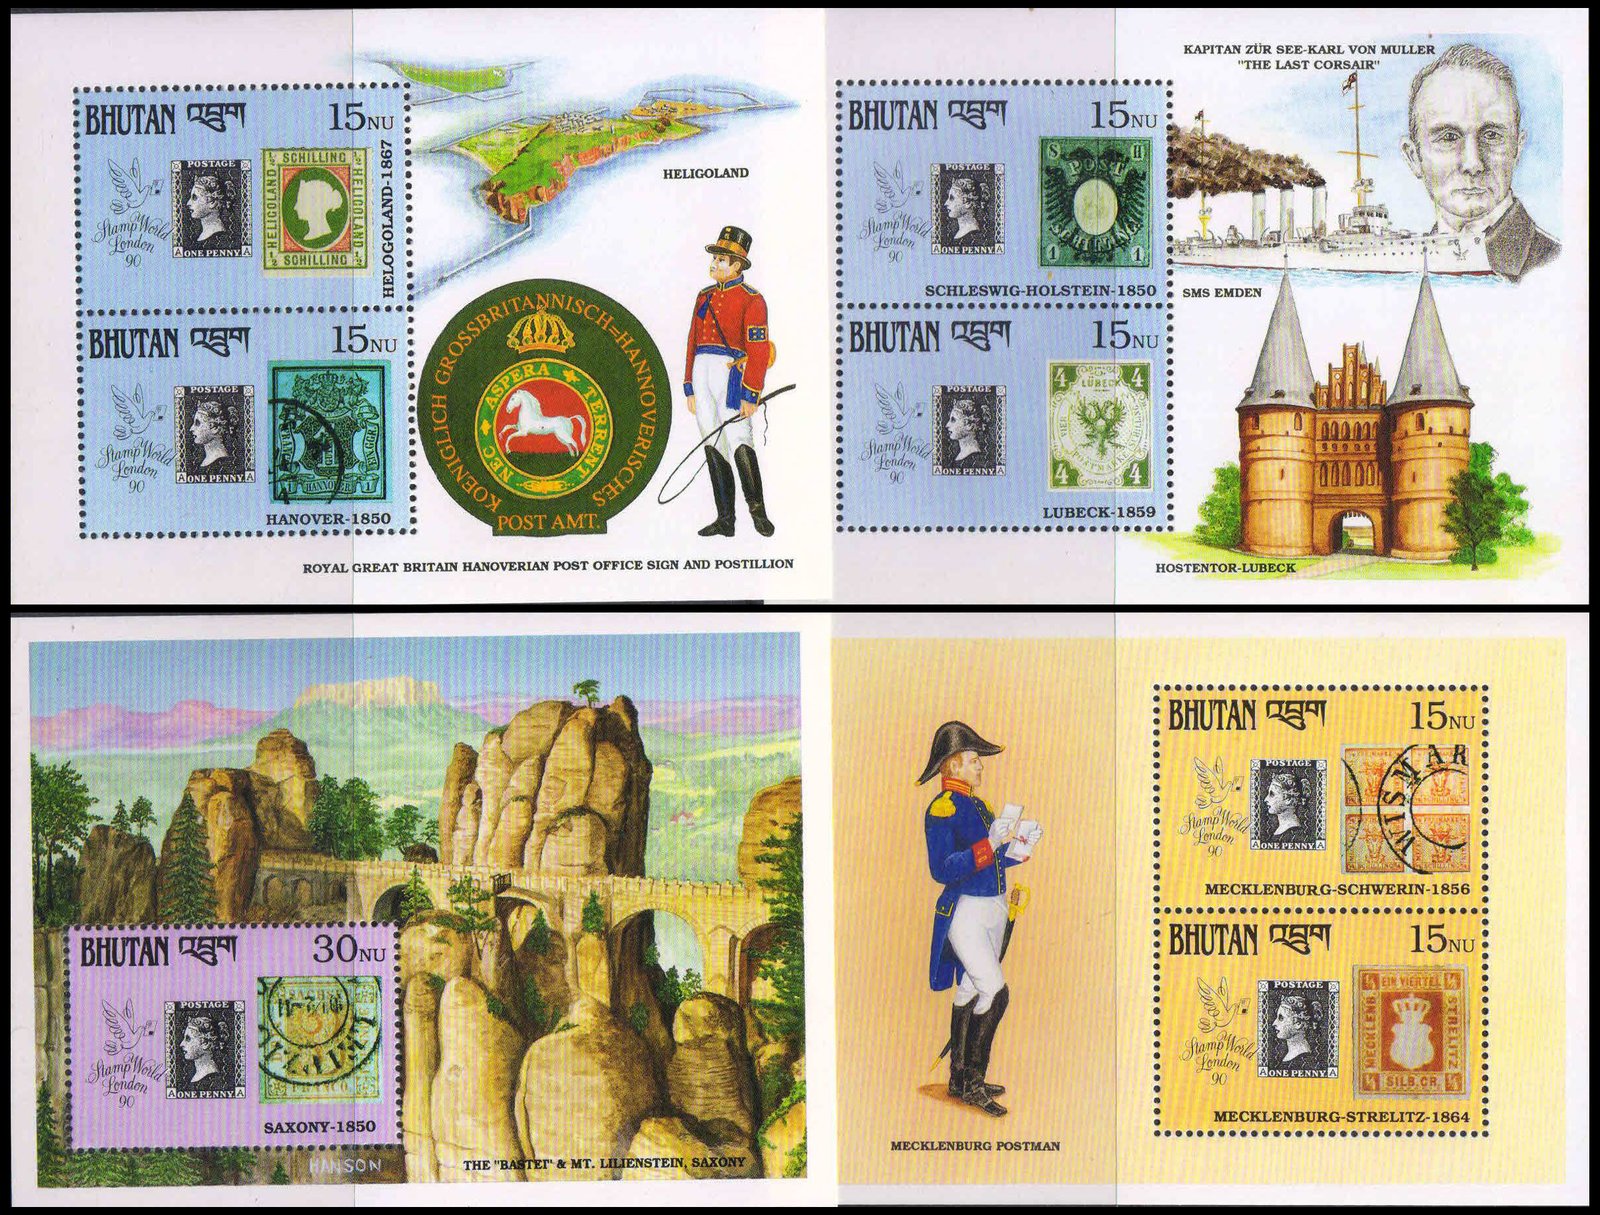 BHUTAN 1990-London 1990 International Stamp Exhibition, 150th Anniv. of Penny Black, Stamp on Stamp, Set of 4 Different Sheets-Cat � 24-